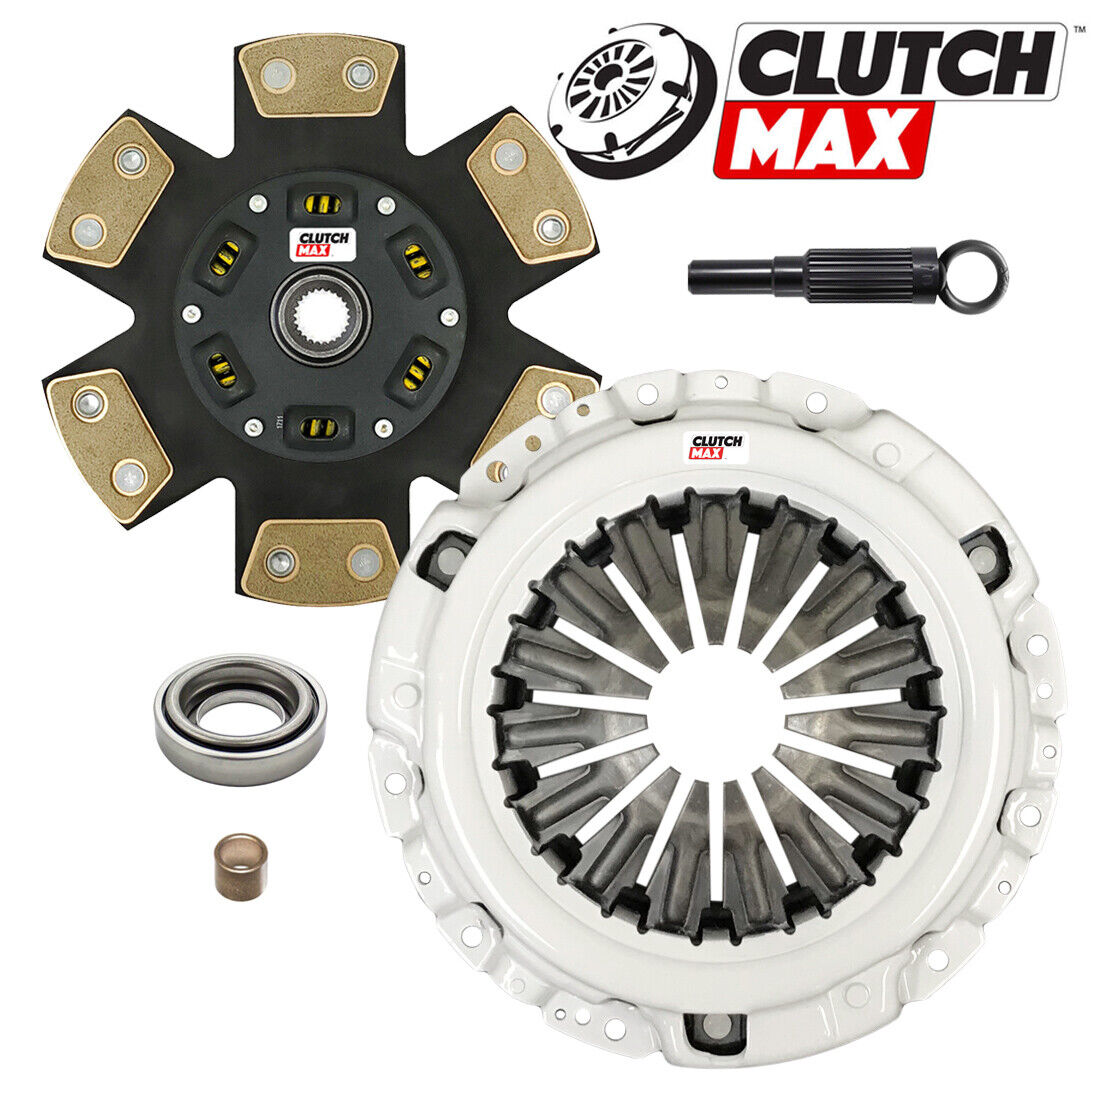 CM STAGE 3 HD RACE CLUTCH KIT FOR 2003-2006 NISSAN 350Z ENTHUSIAST TOURING TRACK